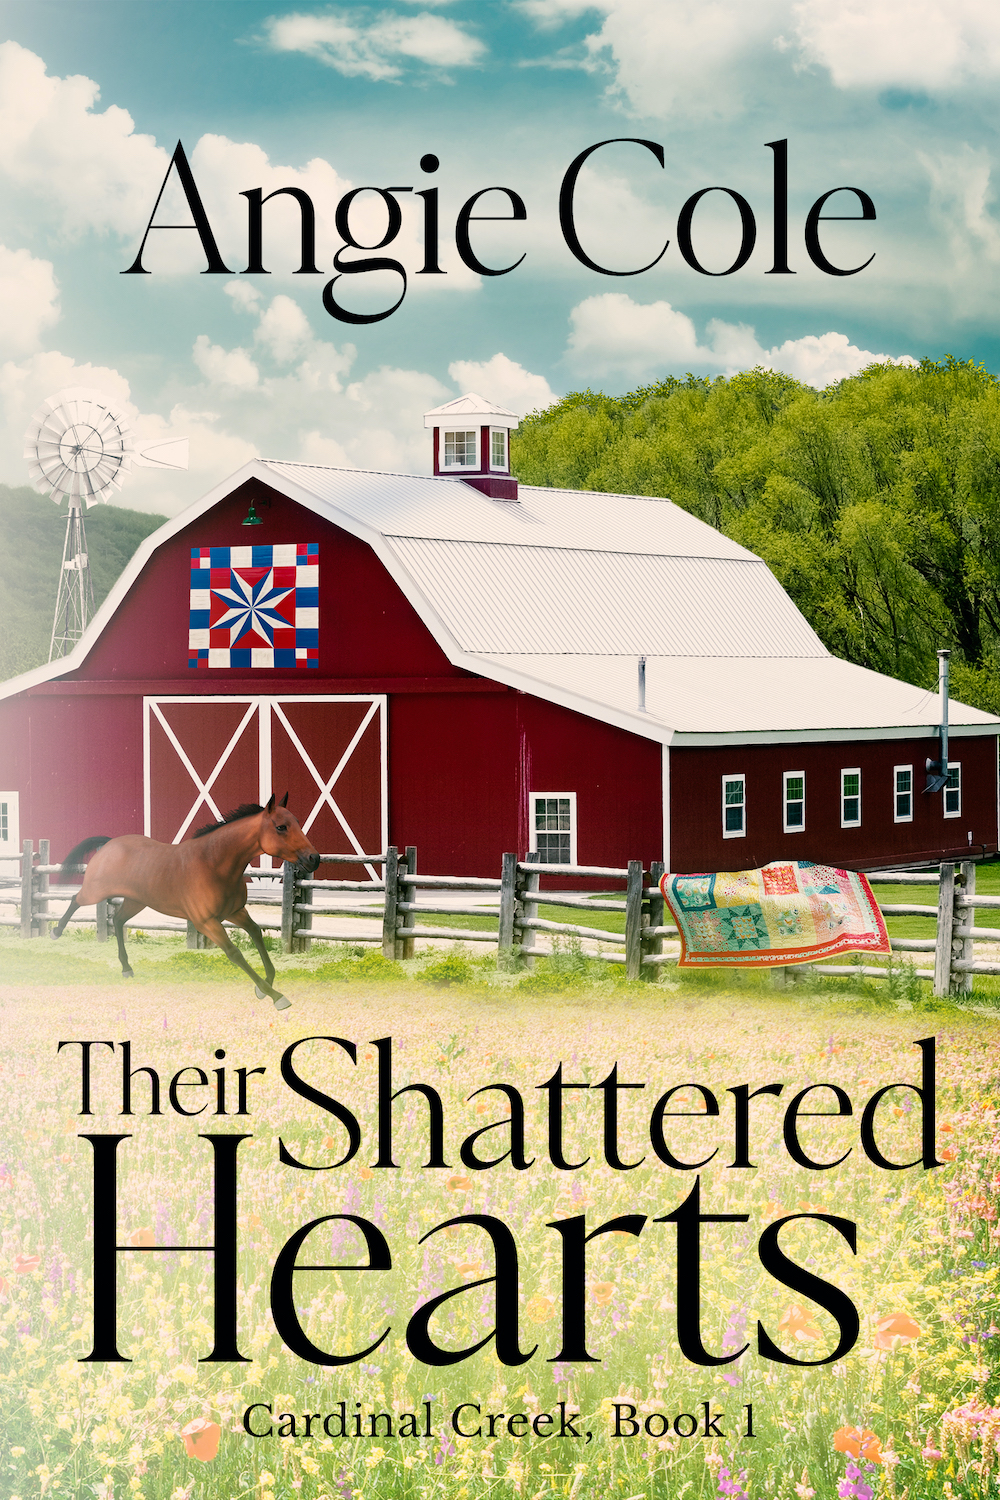 Their Shattered Hearts by Angie Cole